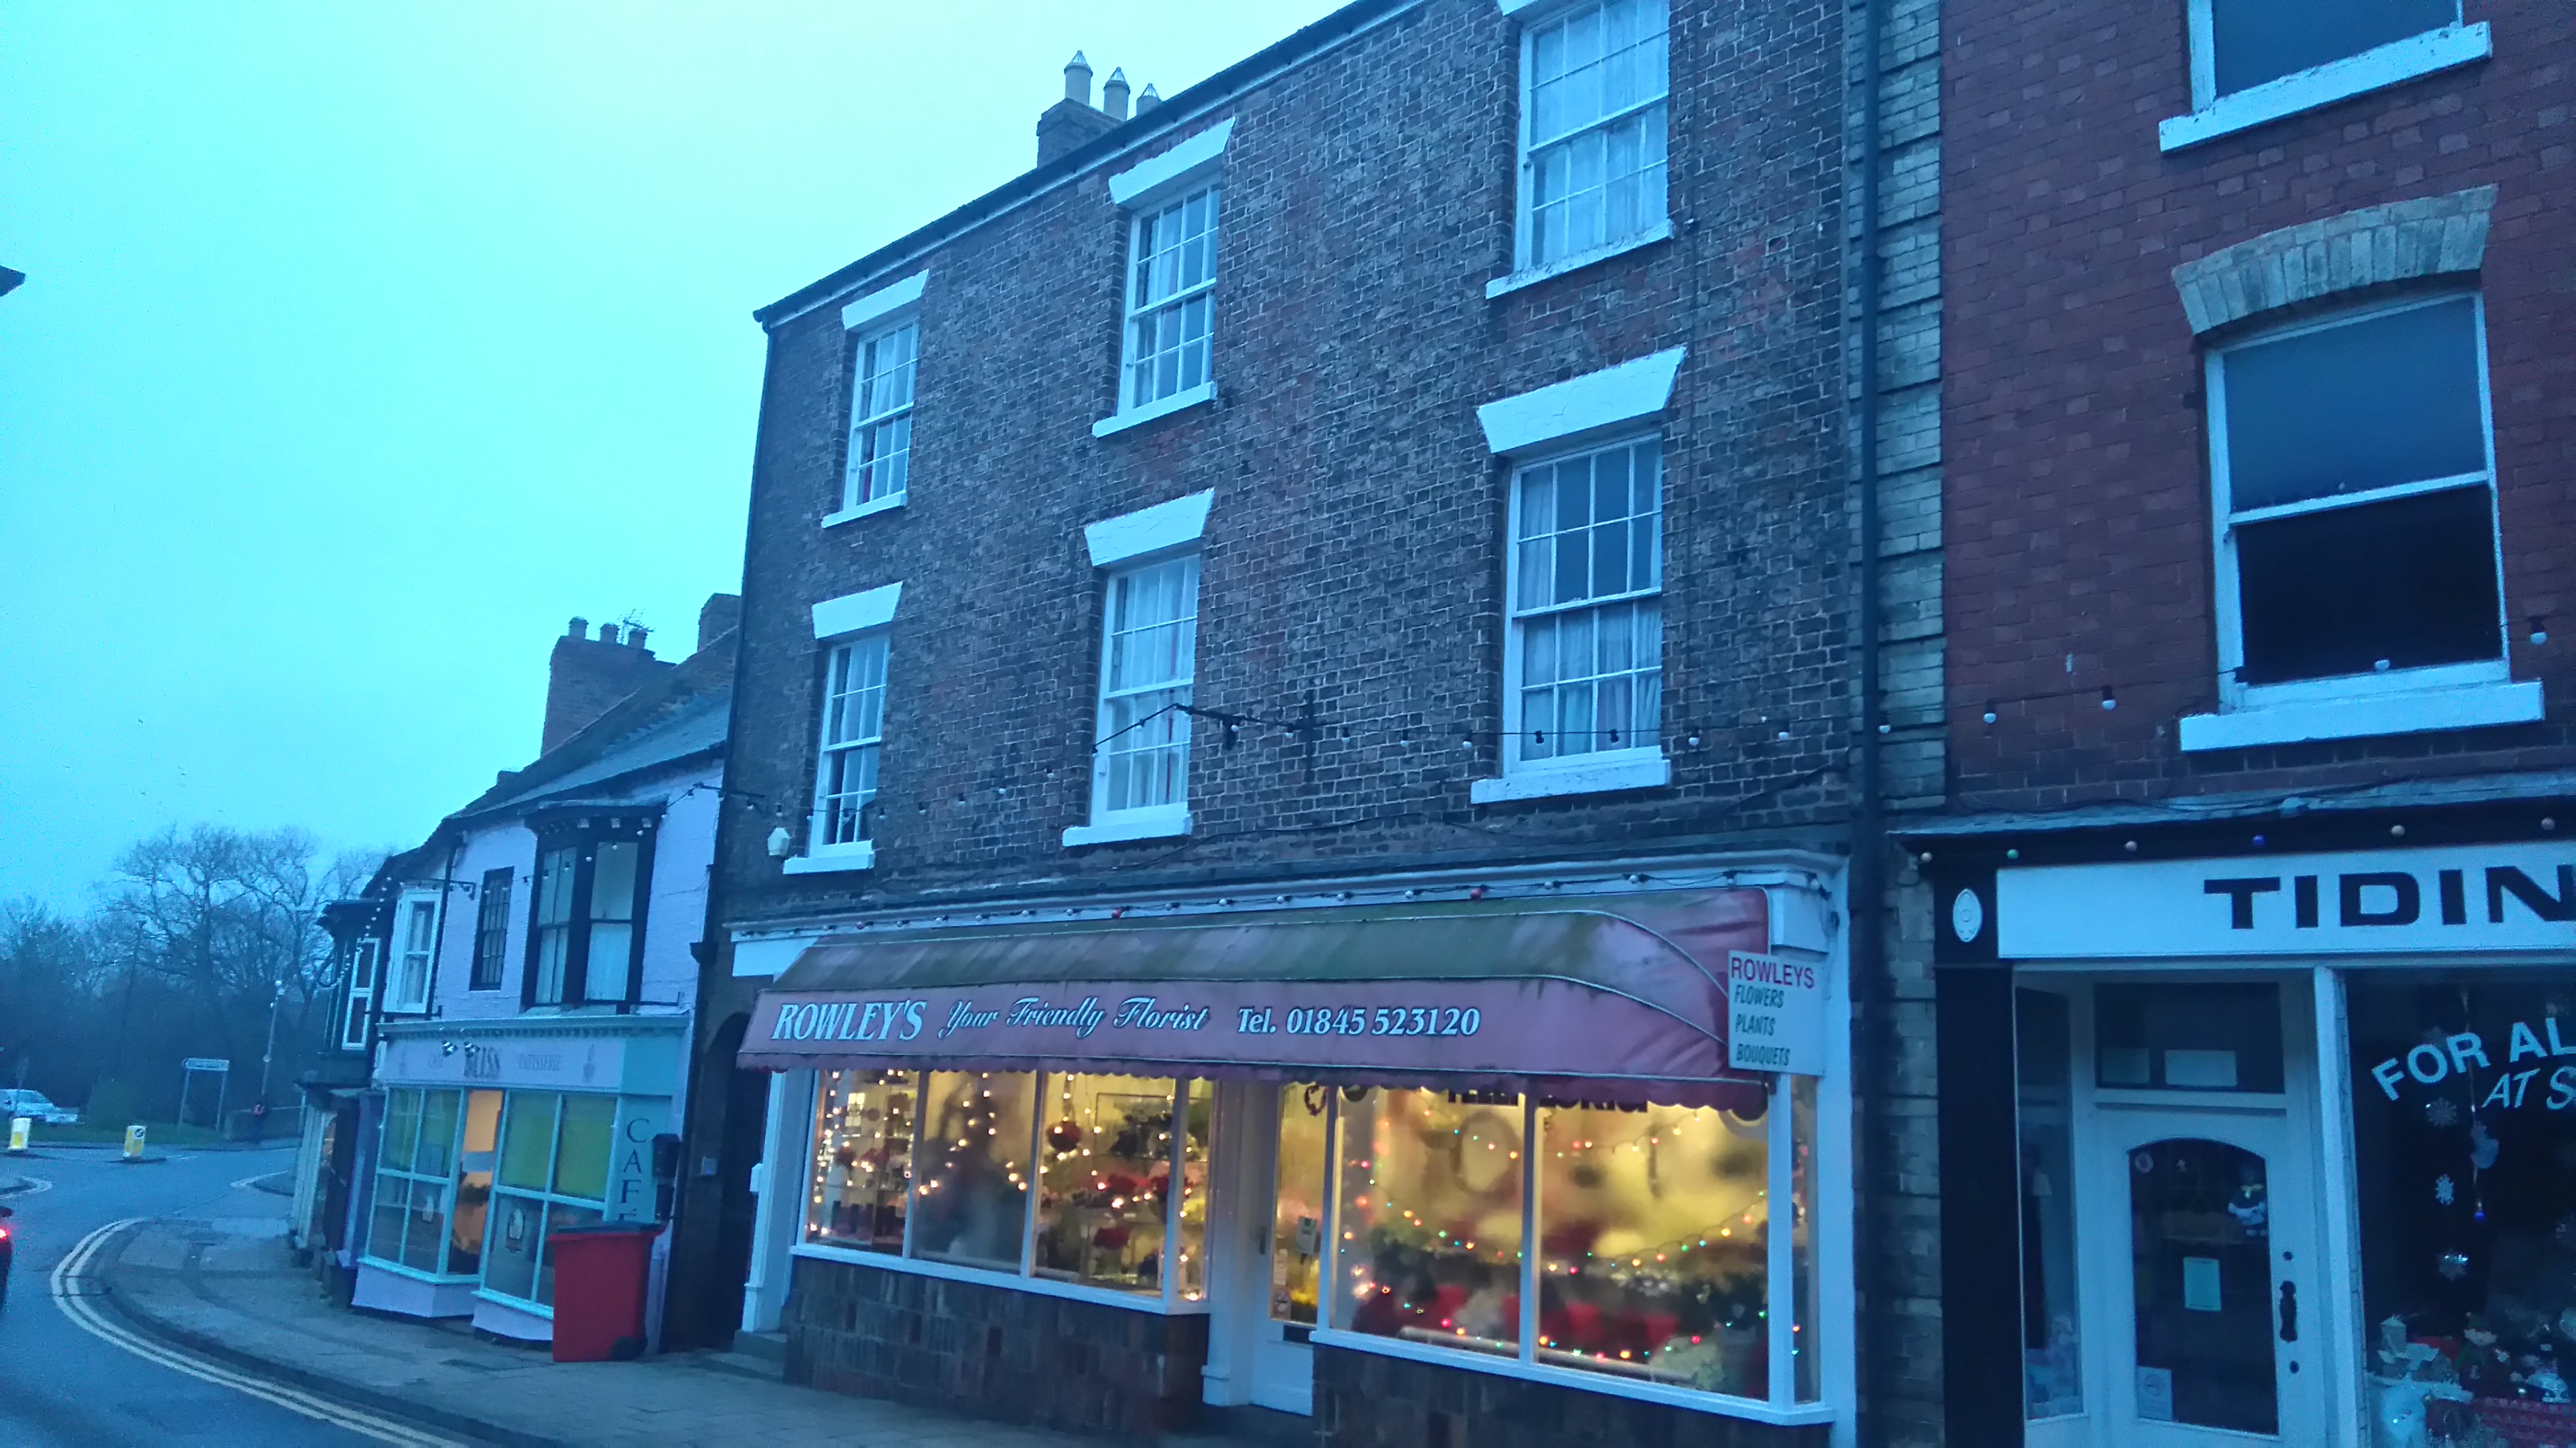 Management survey to row of 7 shops and associated flats.